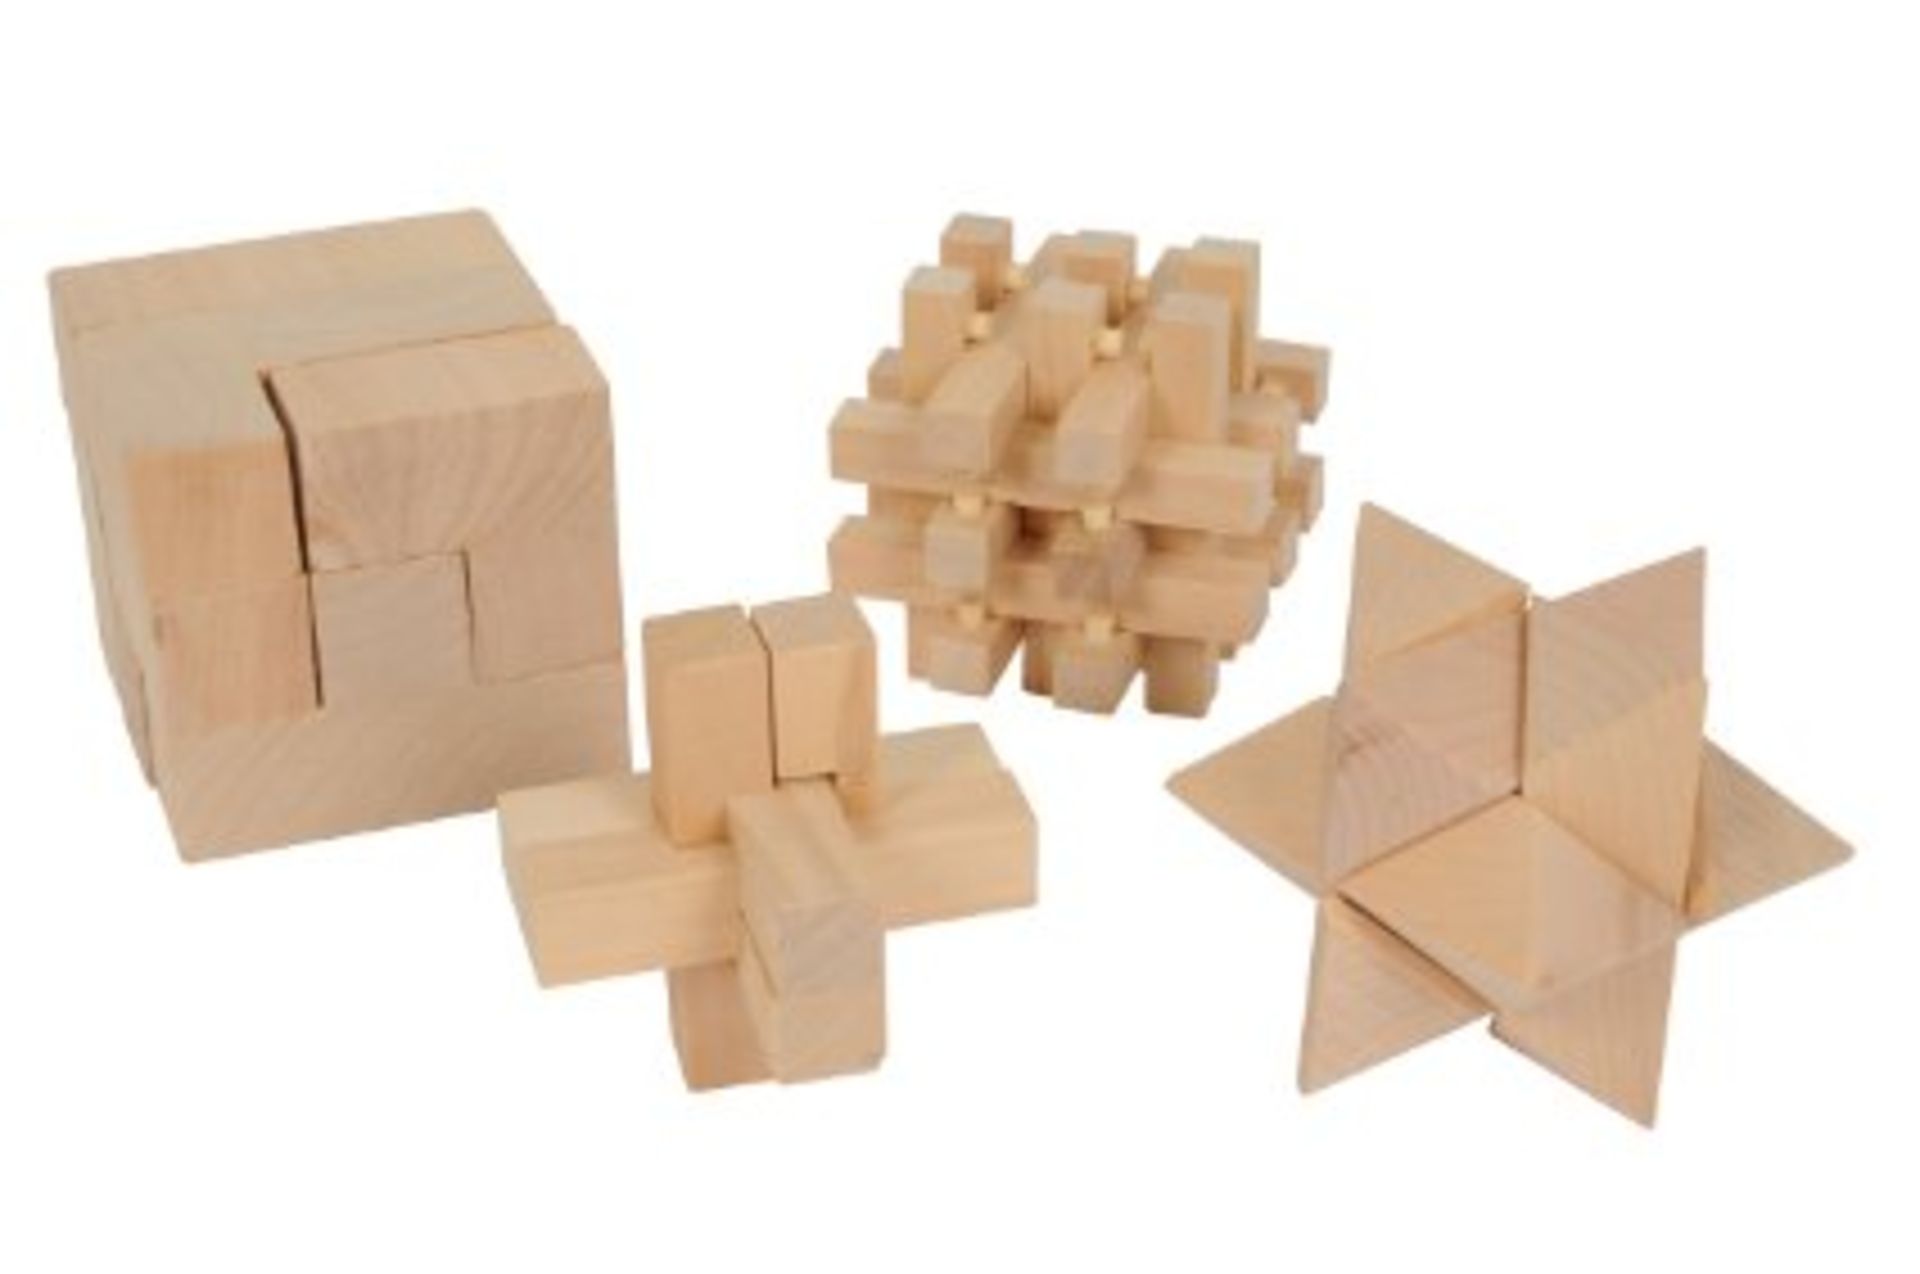 V *TRADE QTY* Brand New Boxed Set Four Quality Wooden Brain Teaser Puzzles ú10.89 on Ebay X 10